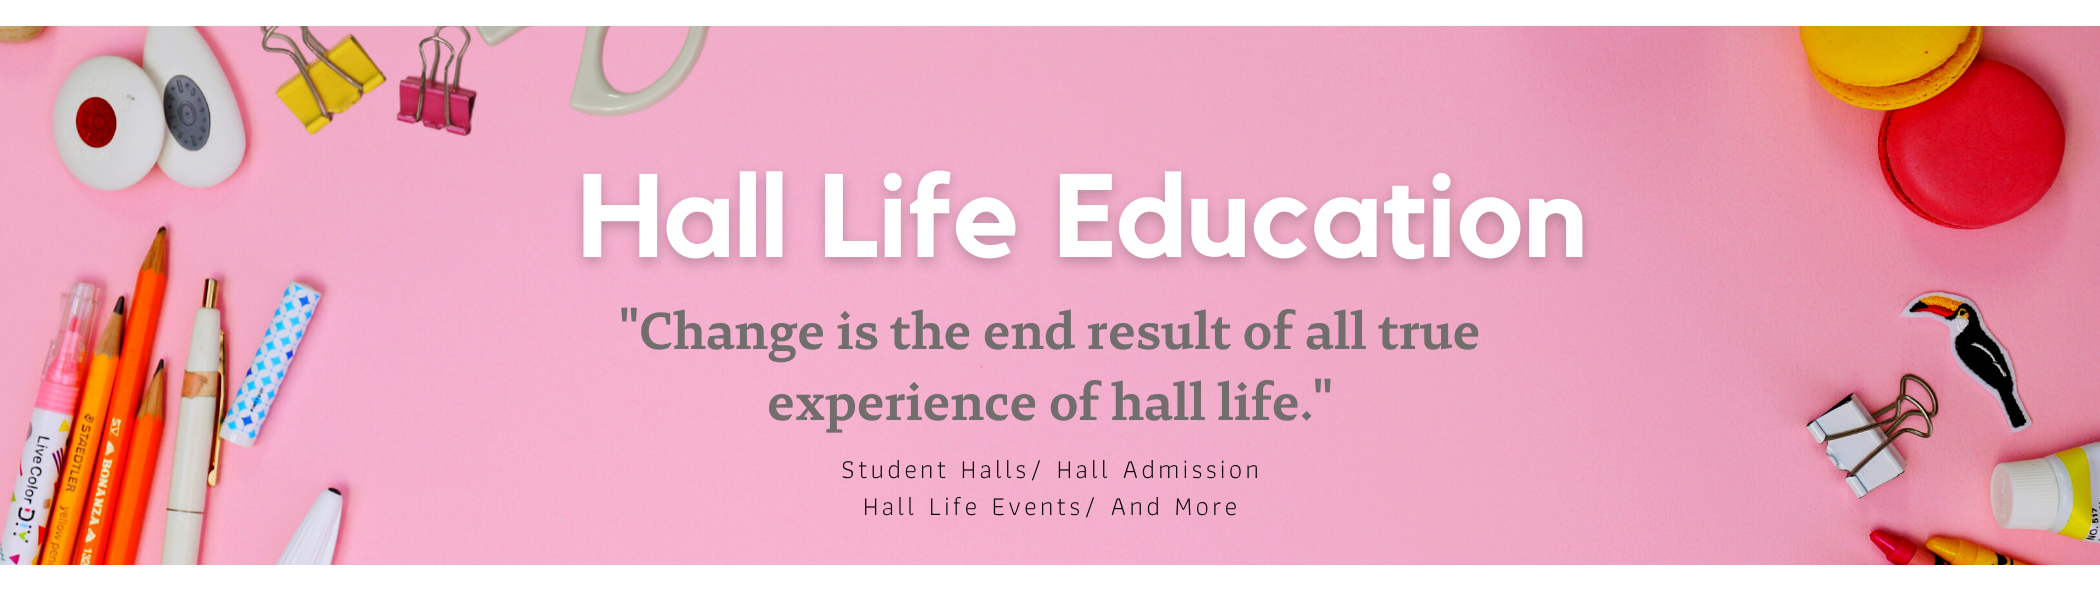 Hall Education (revised size)